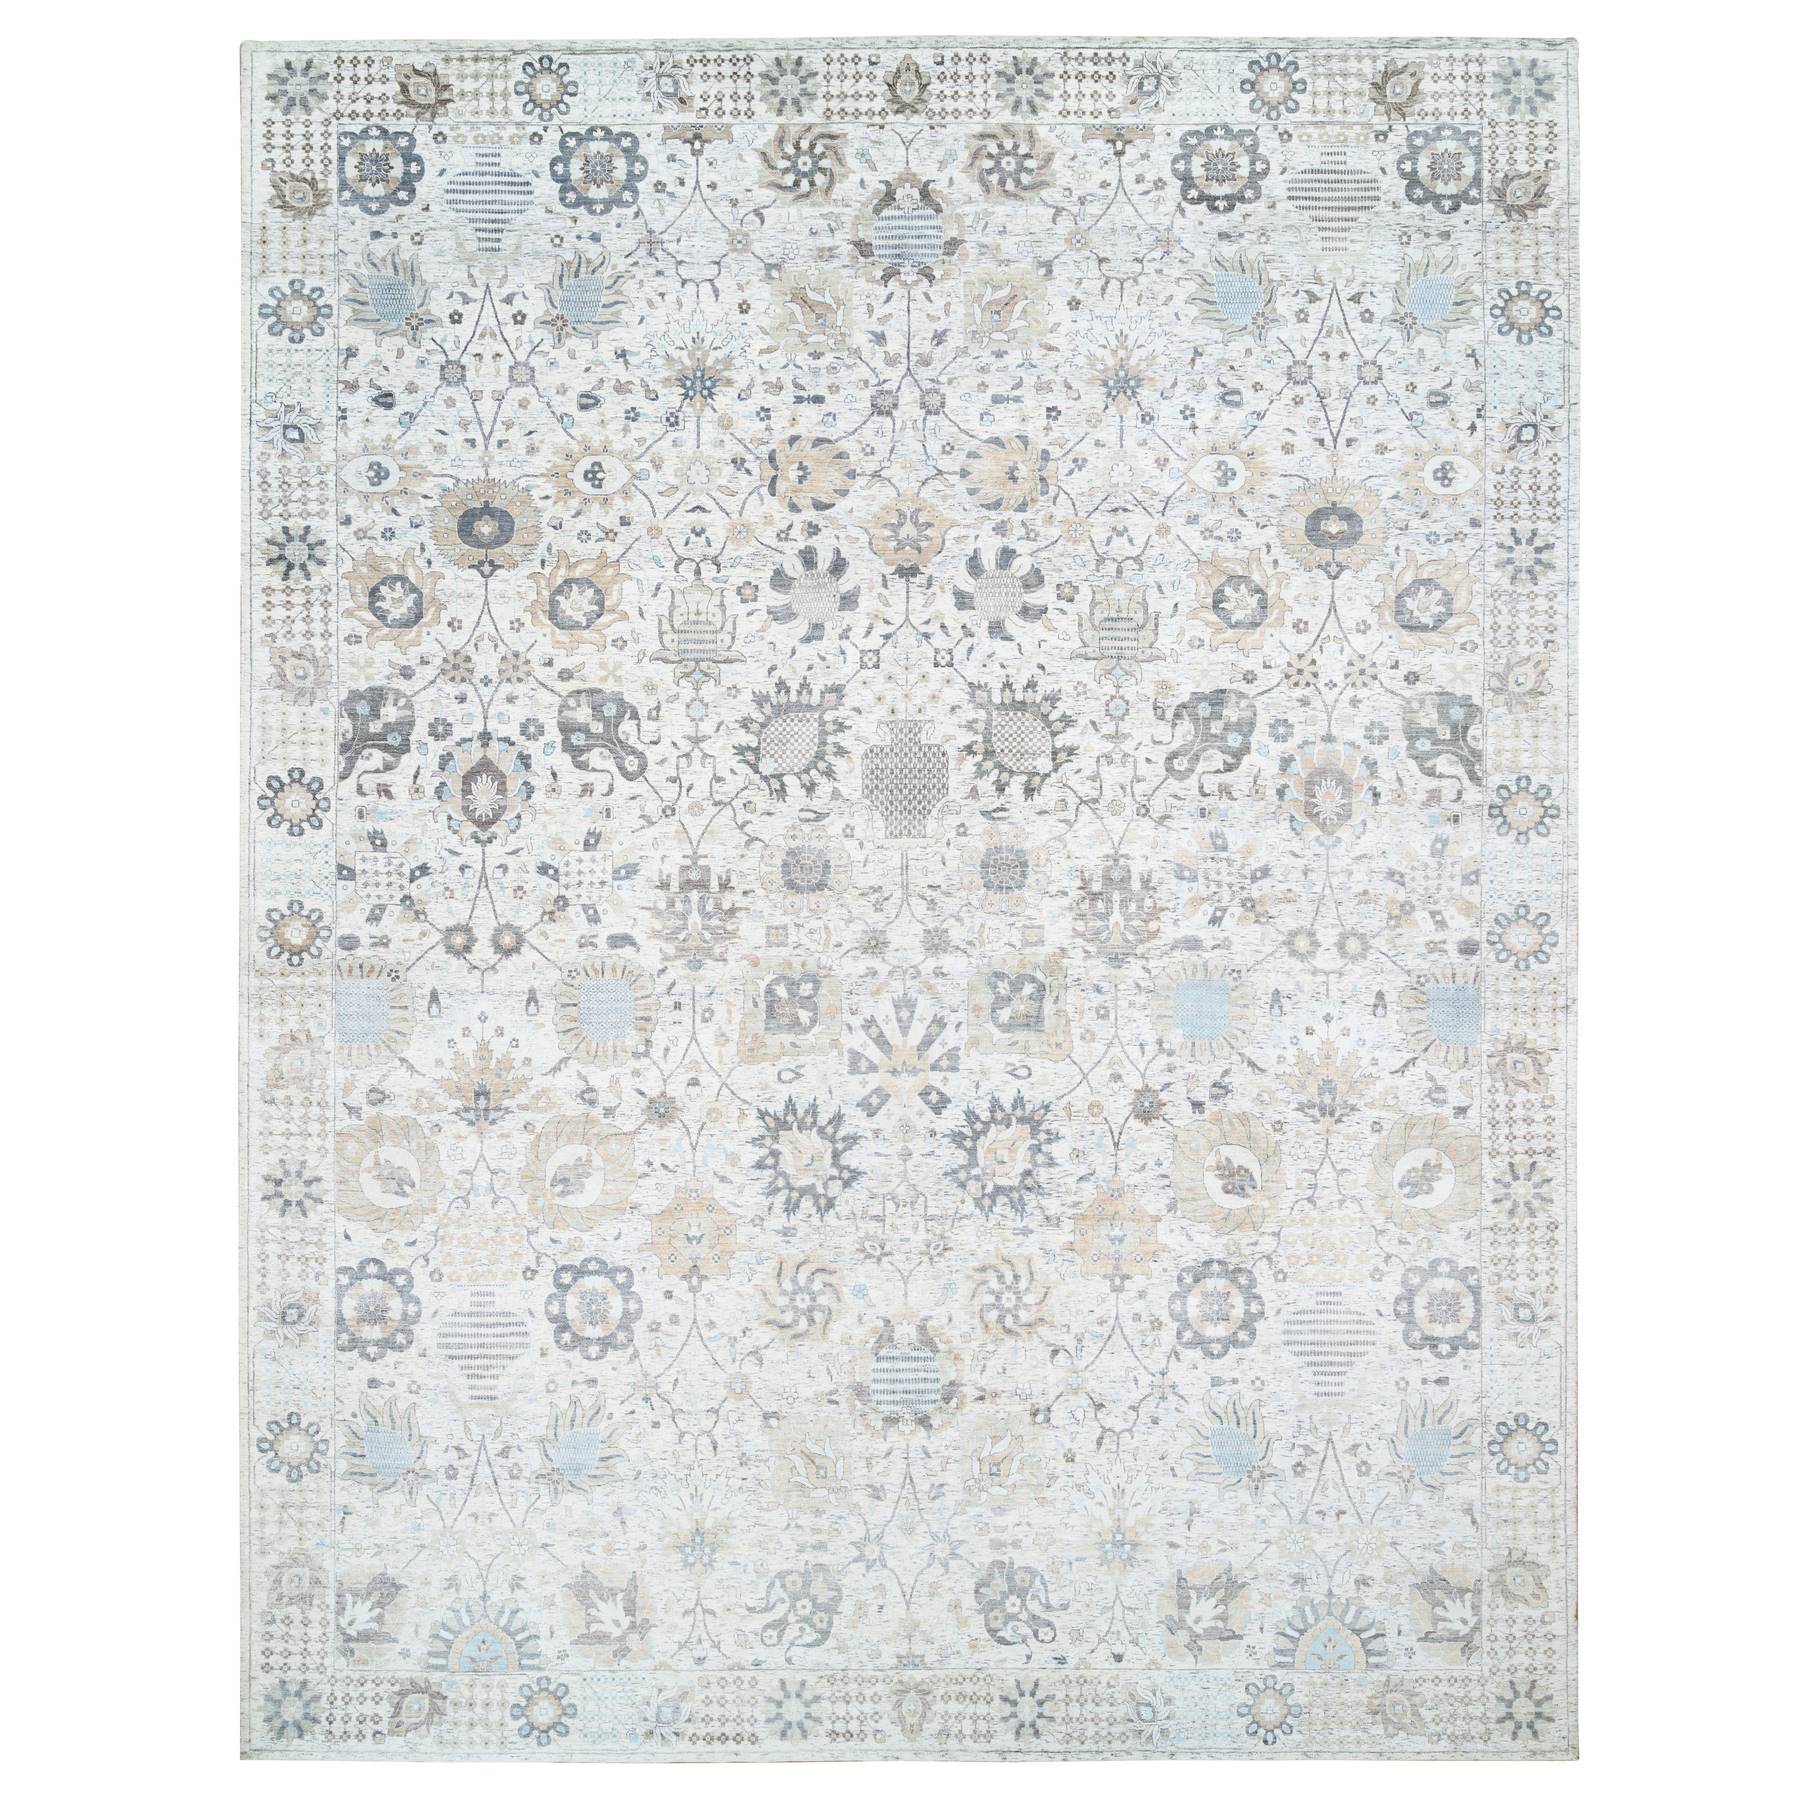  Silk Hand-Knotted Area Rug 13'9